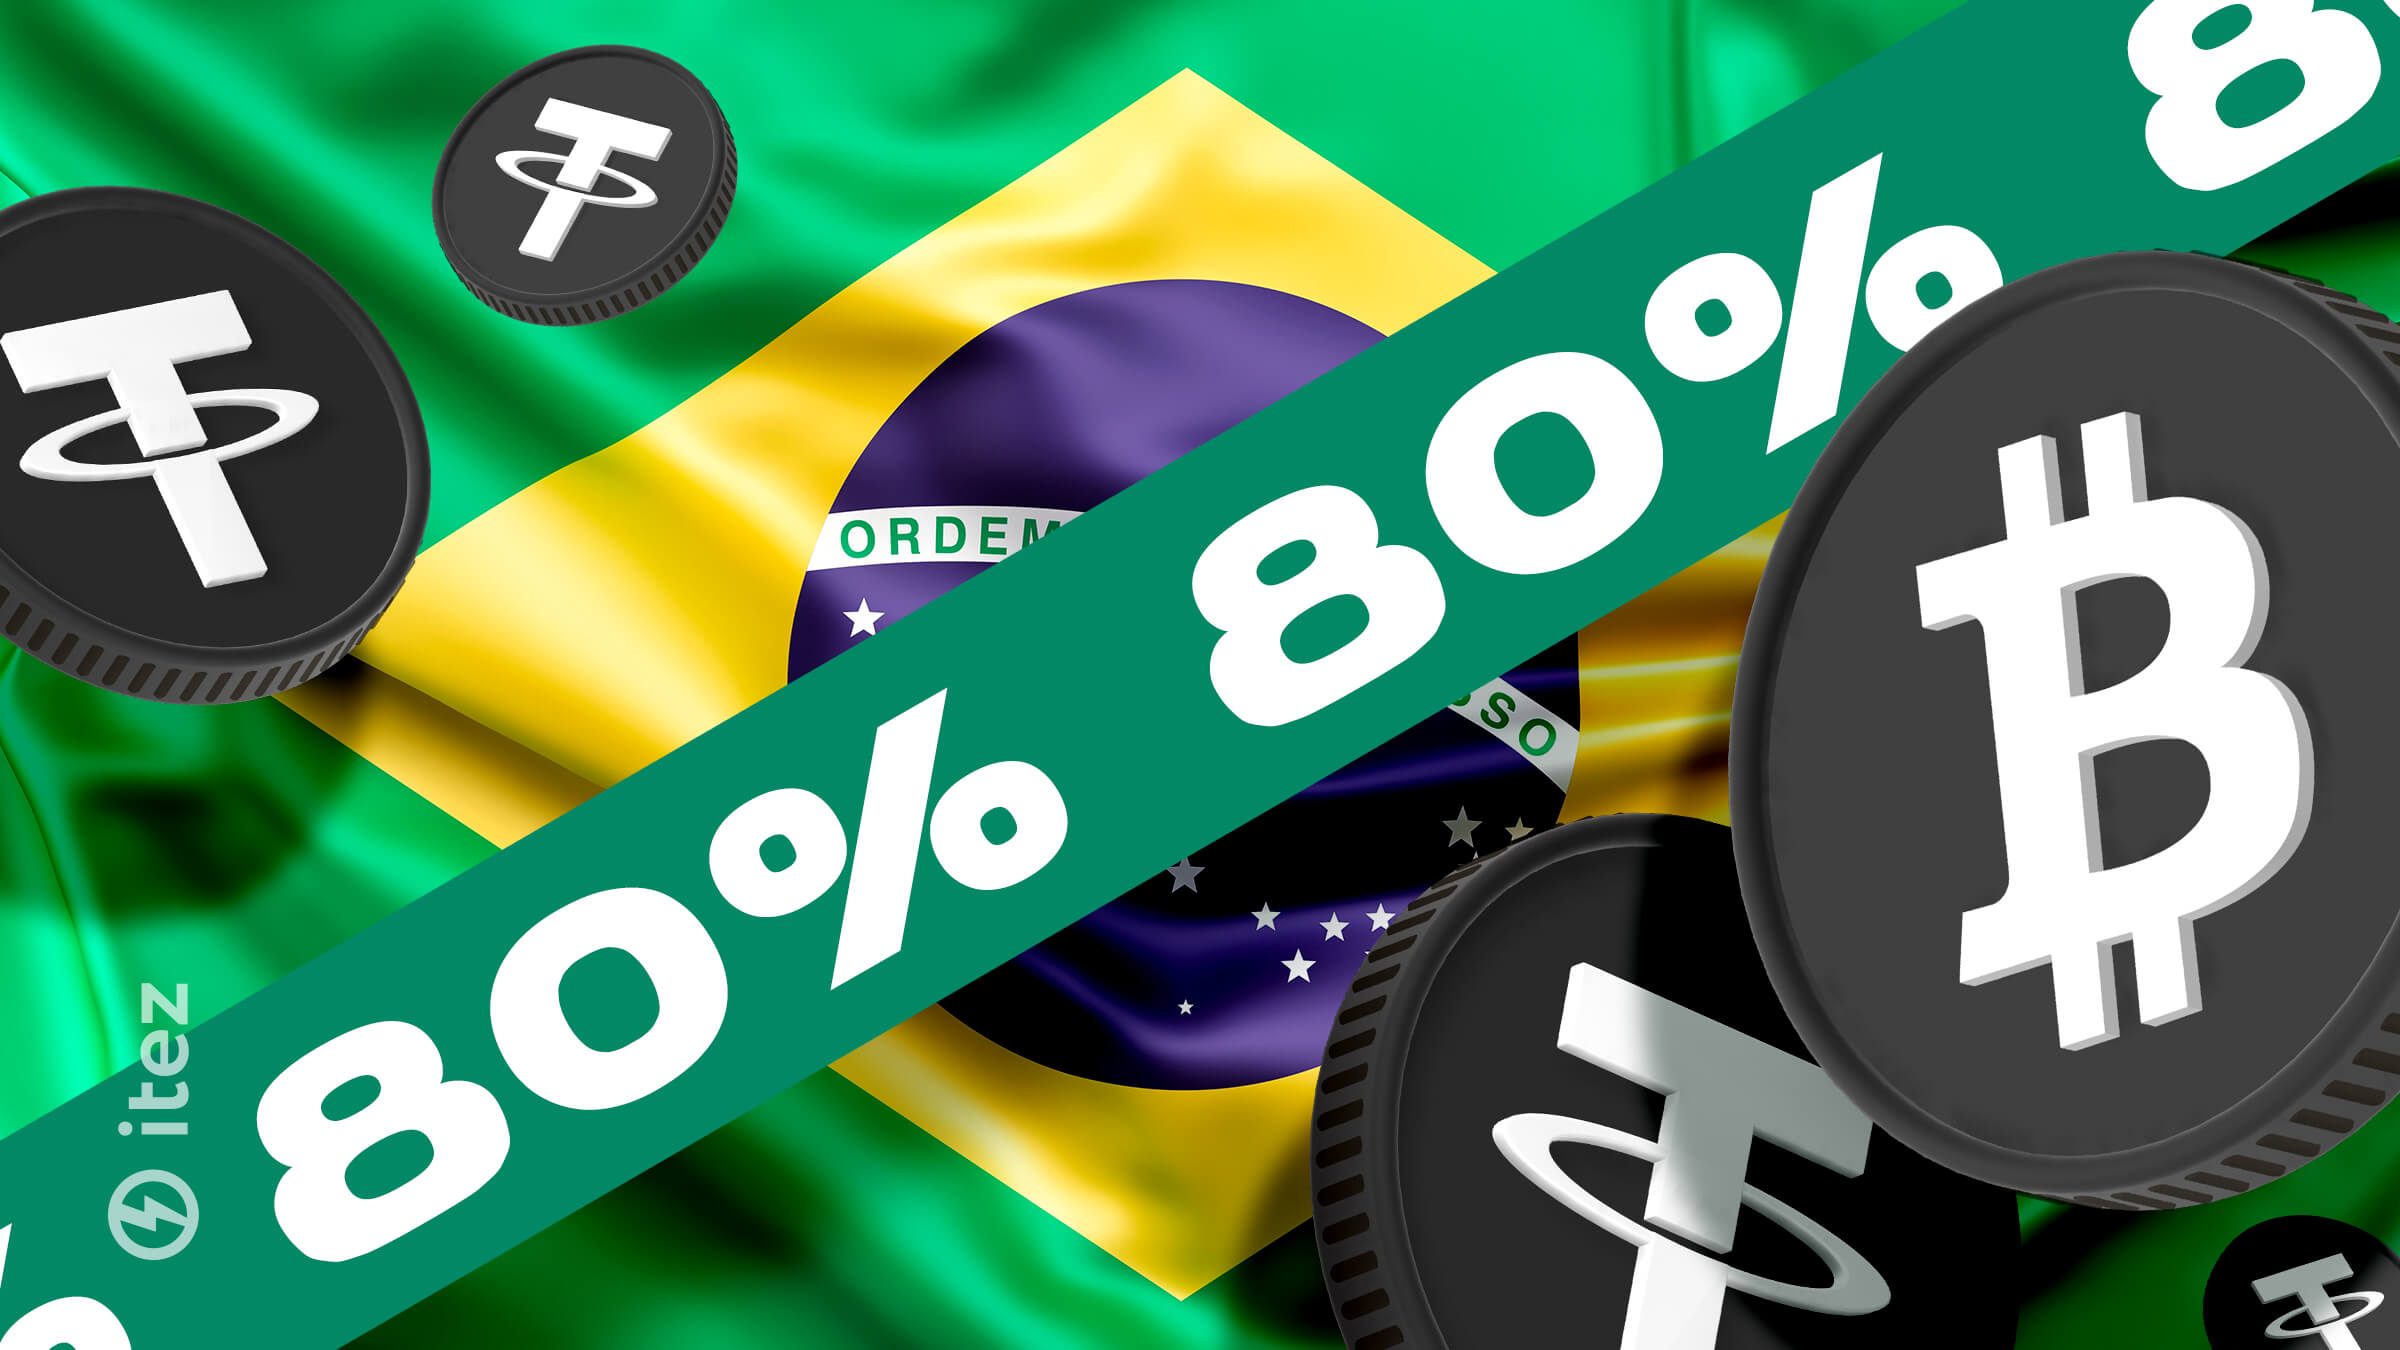 USDT dominates cryptocurrencies in Brazil with 80% of transaction volume